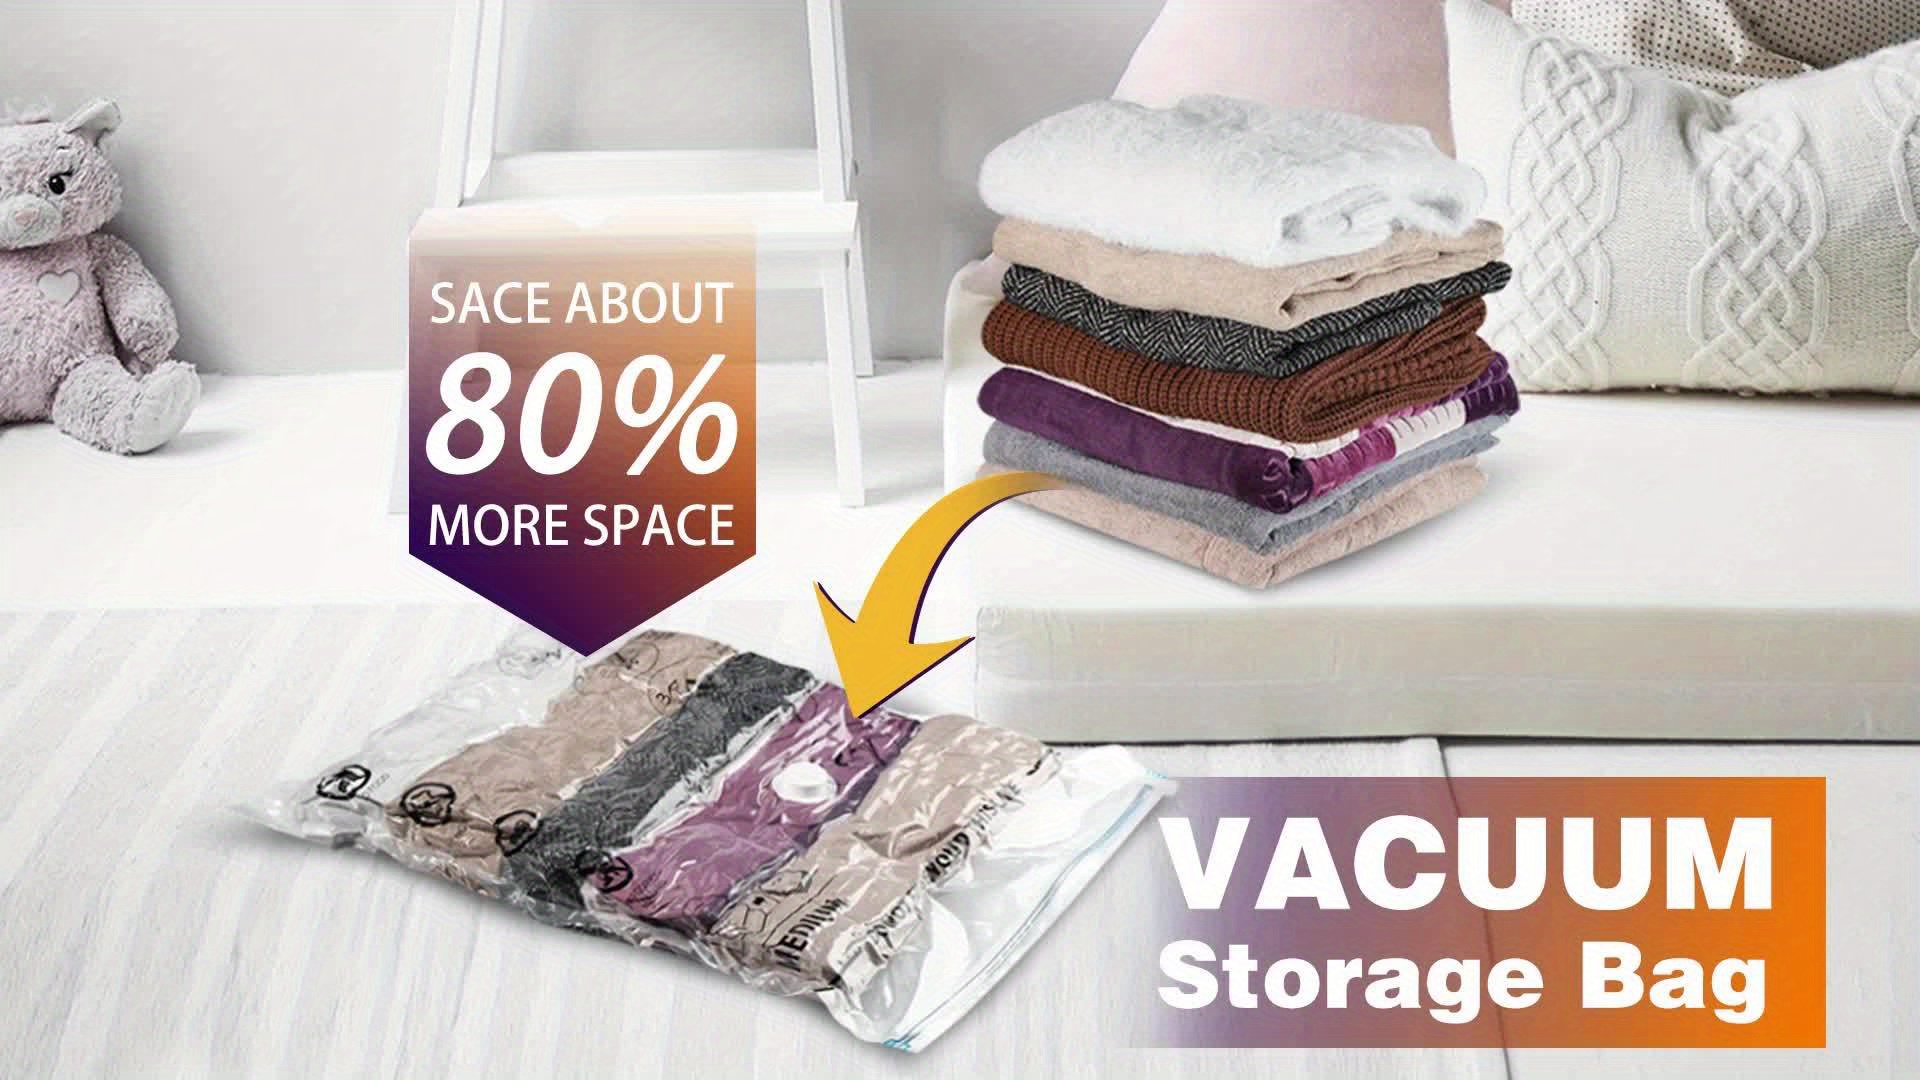 Smart Storage 6 Pack Large Size Extra-Durable Vacuum Storage Space Saver  Bag Set with Travel Pump 24 x 31.5 inch (60 x 80 cm)